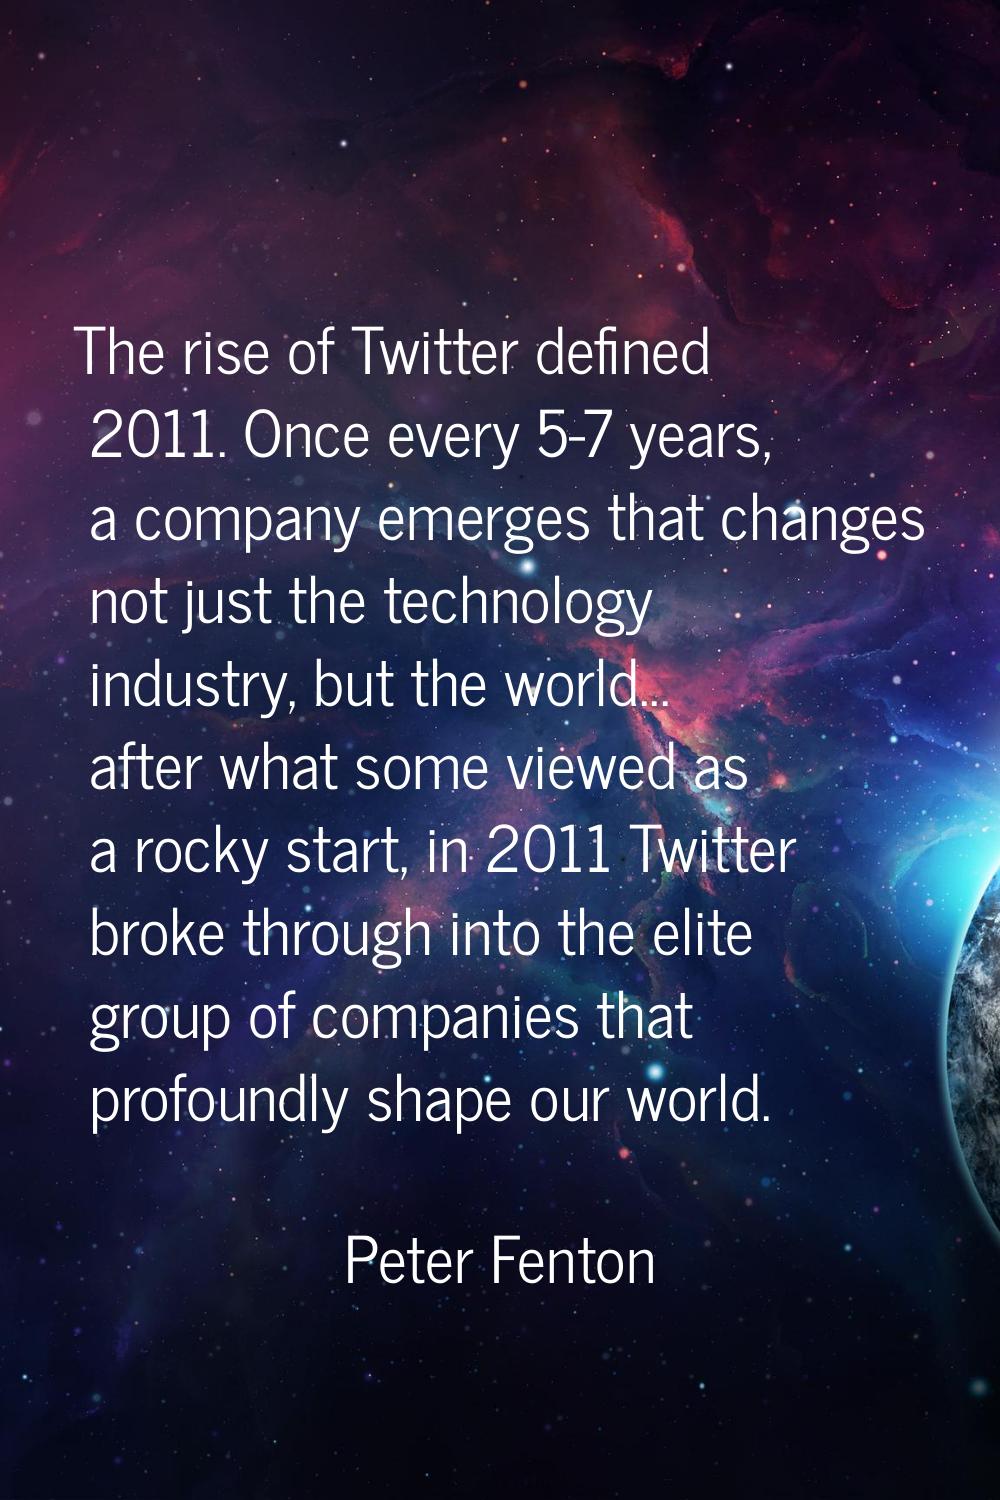 The rise of Twitter defined 2011. Once every 5-7 years, a company emerges that changes not just the